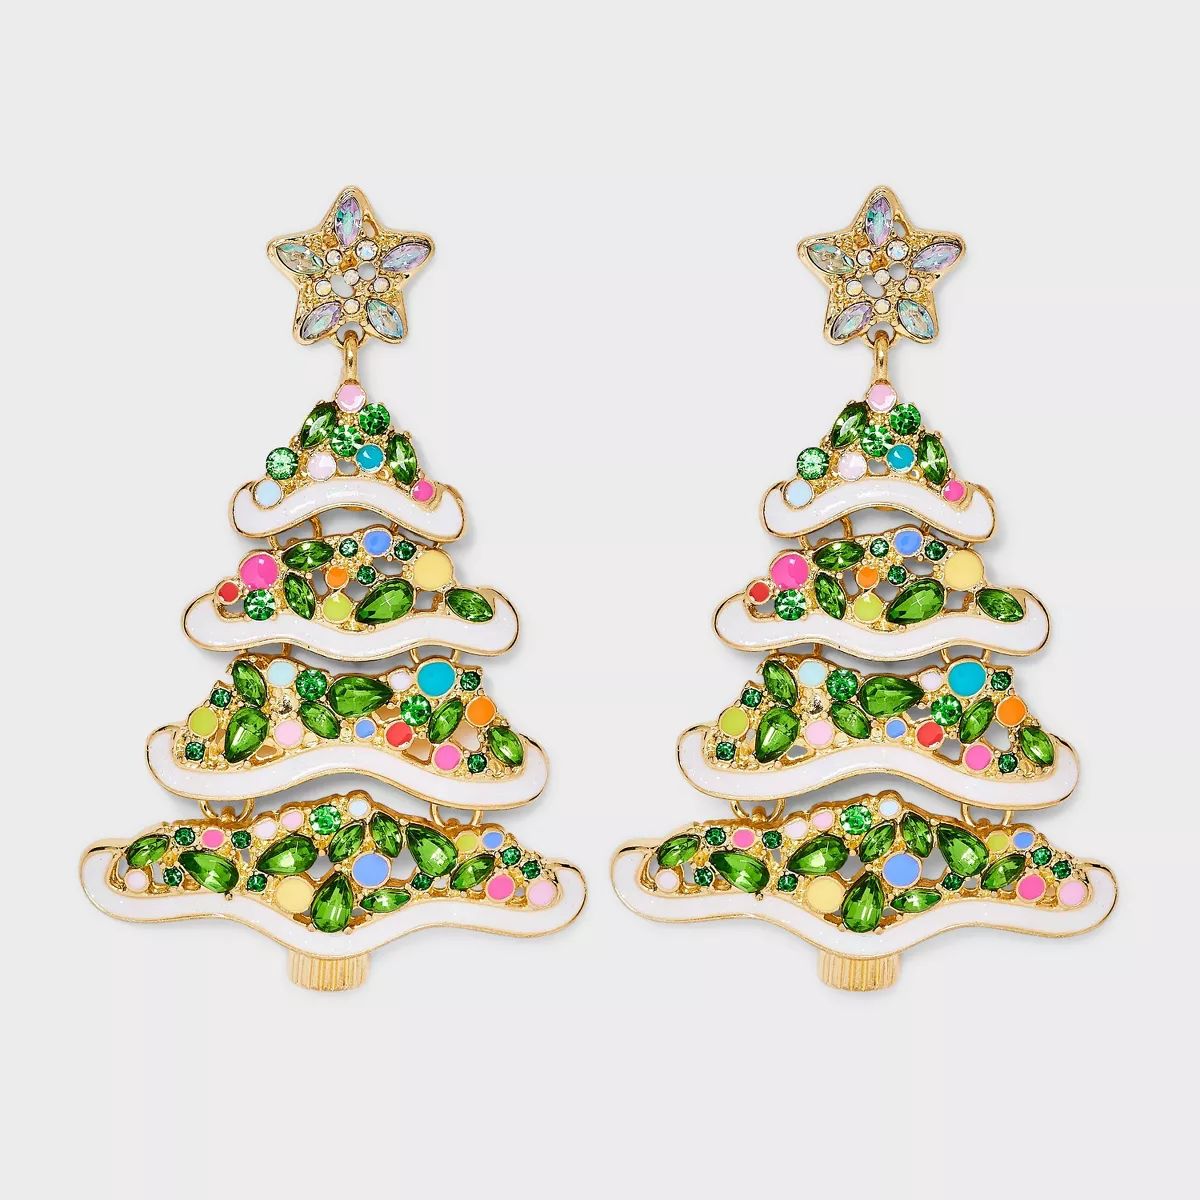 SUGARFIX by BaubleBar "Pining for You" Statement Earrings - Green | Target